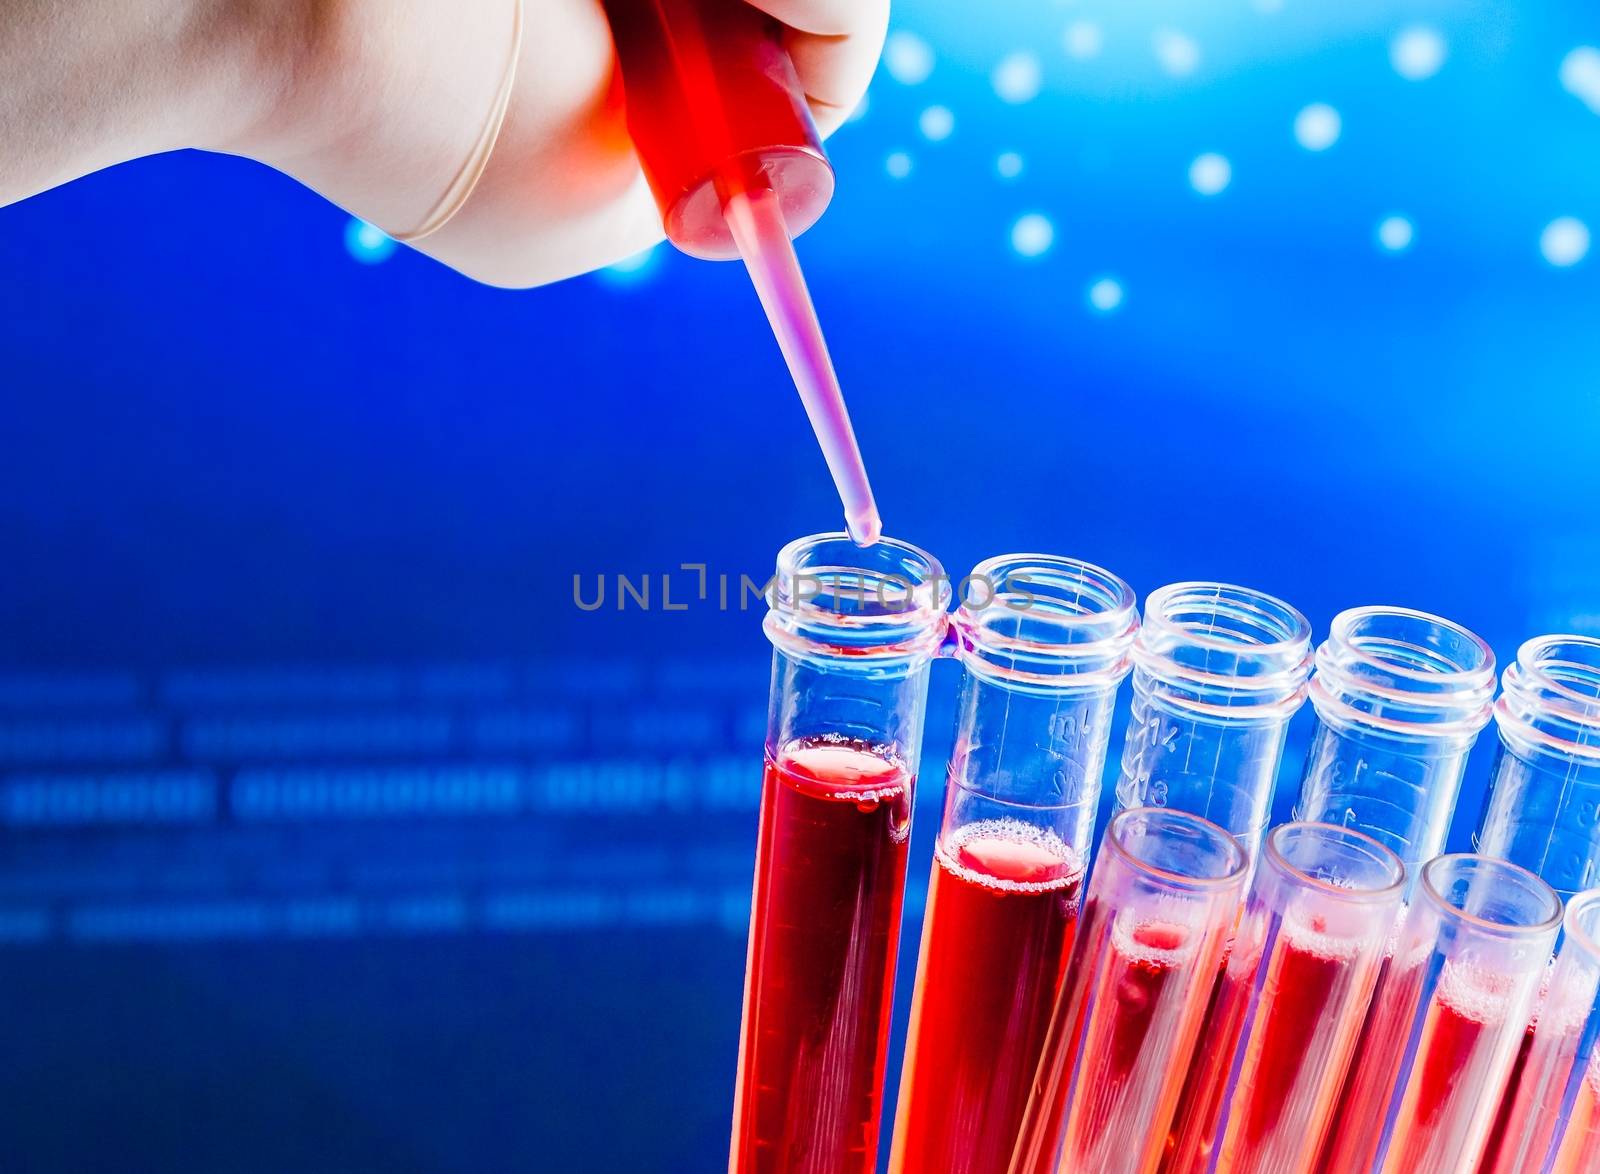 closeup of test tubes with pipette on red liquid on blue light tint background